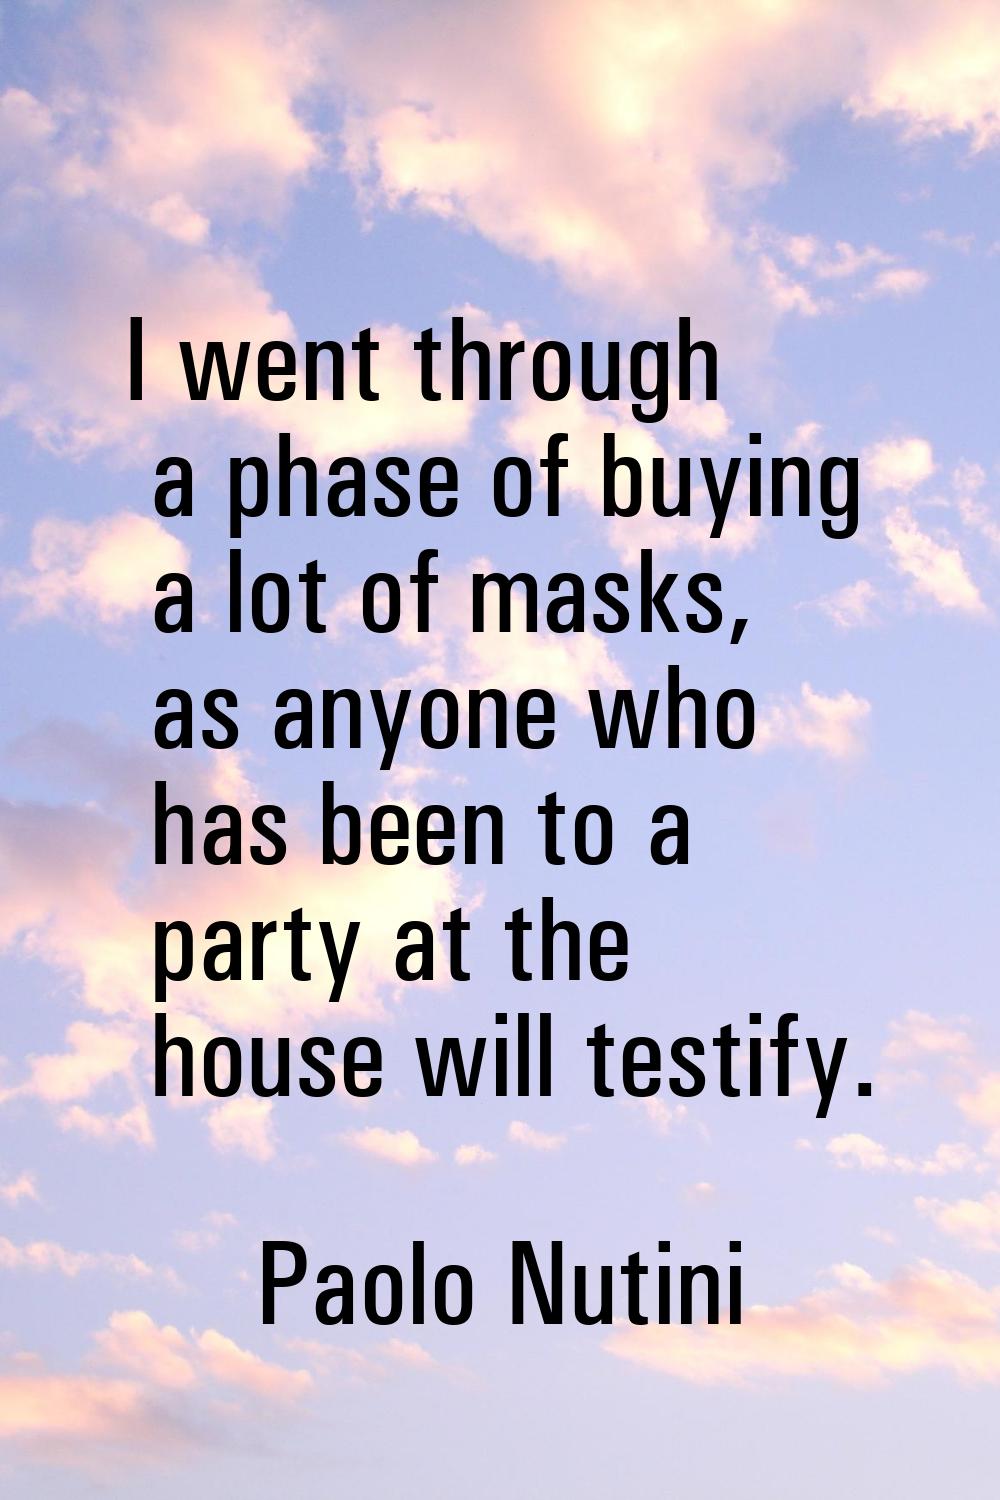 I went through a phase of buying a lot of masks, as anyone who has been to a party at the house wil